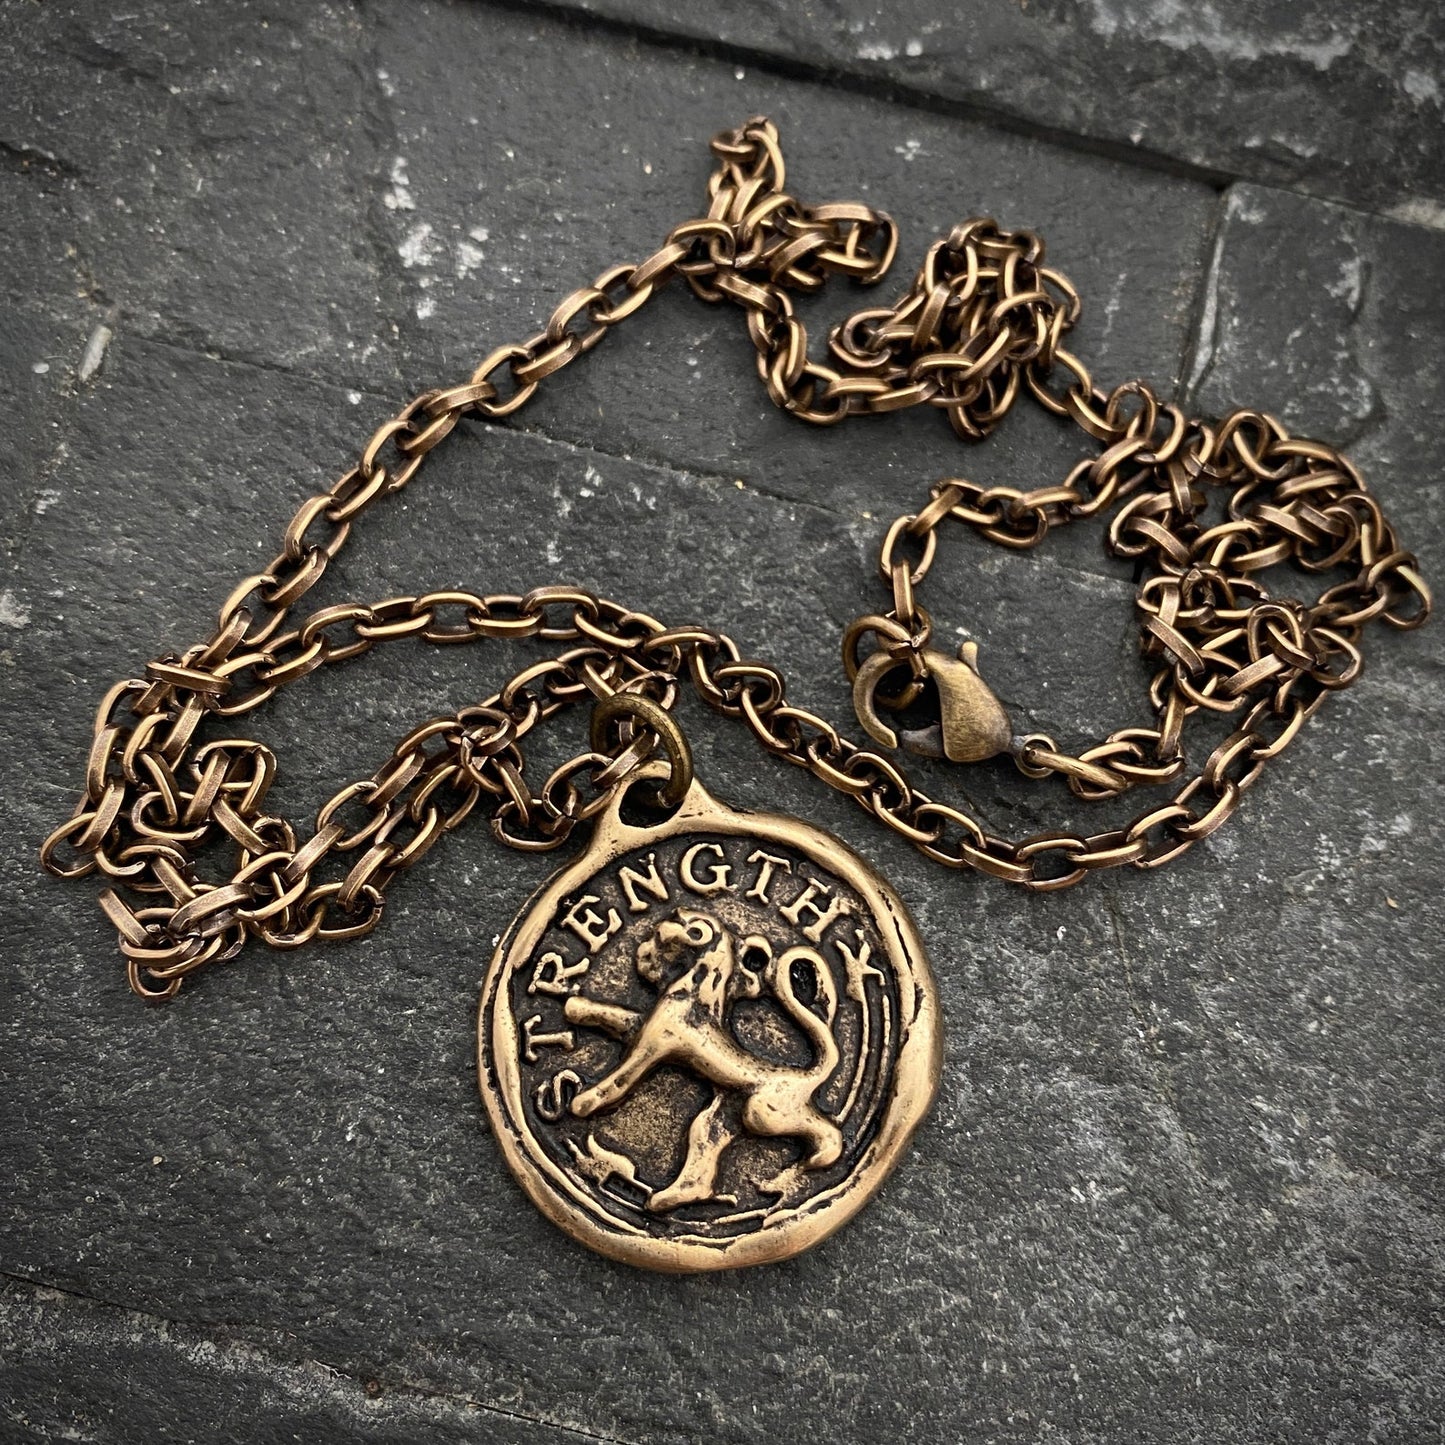 Men's Lion, Strength Wax Seal Necklace, Antiqued Brass Bronze Unisex Jewelry, Chain length 20 or 24 inches BR-060